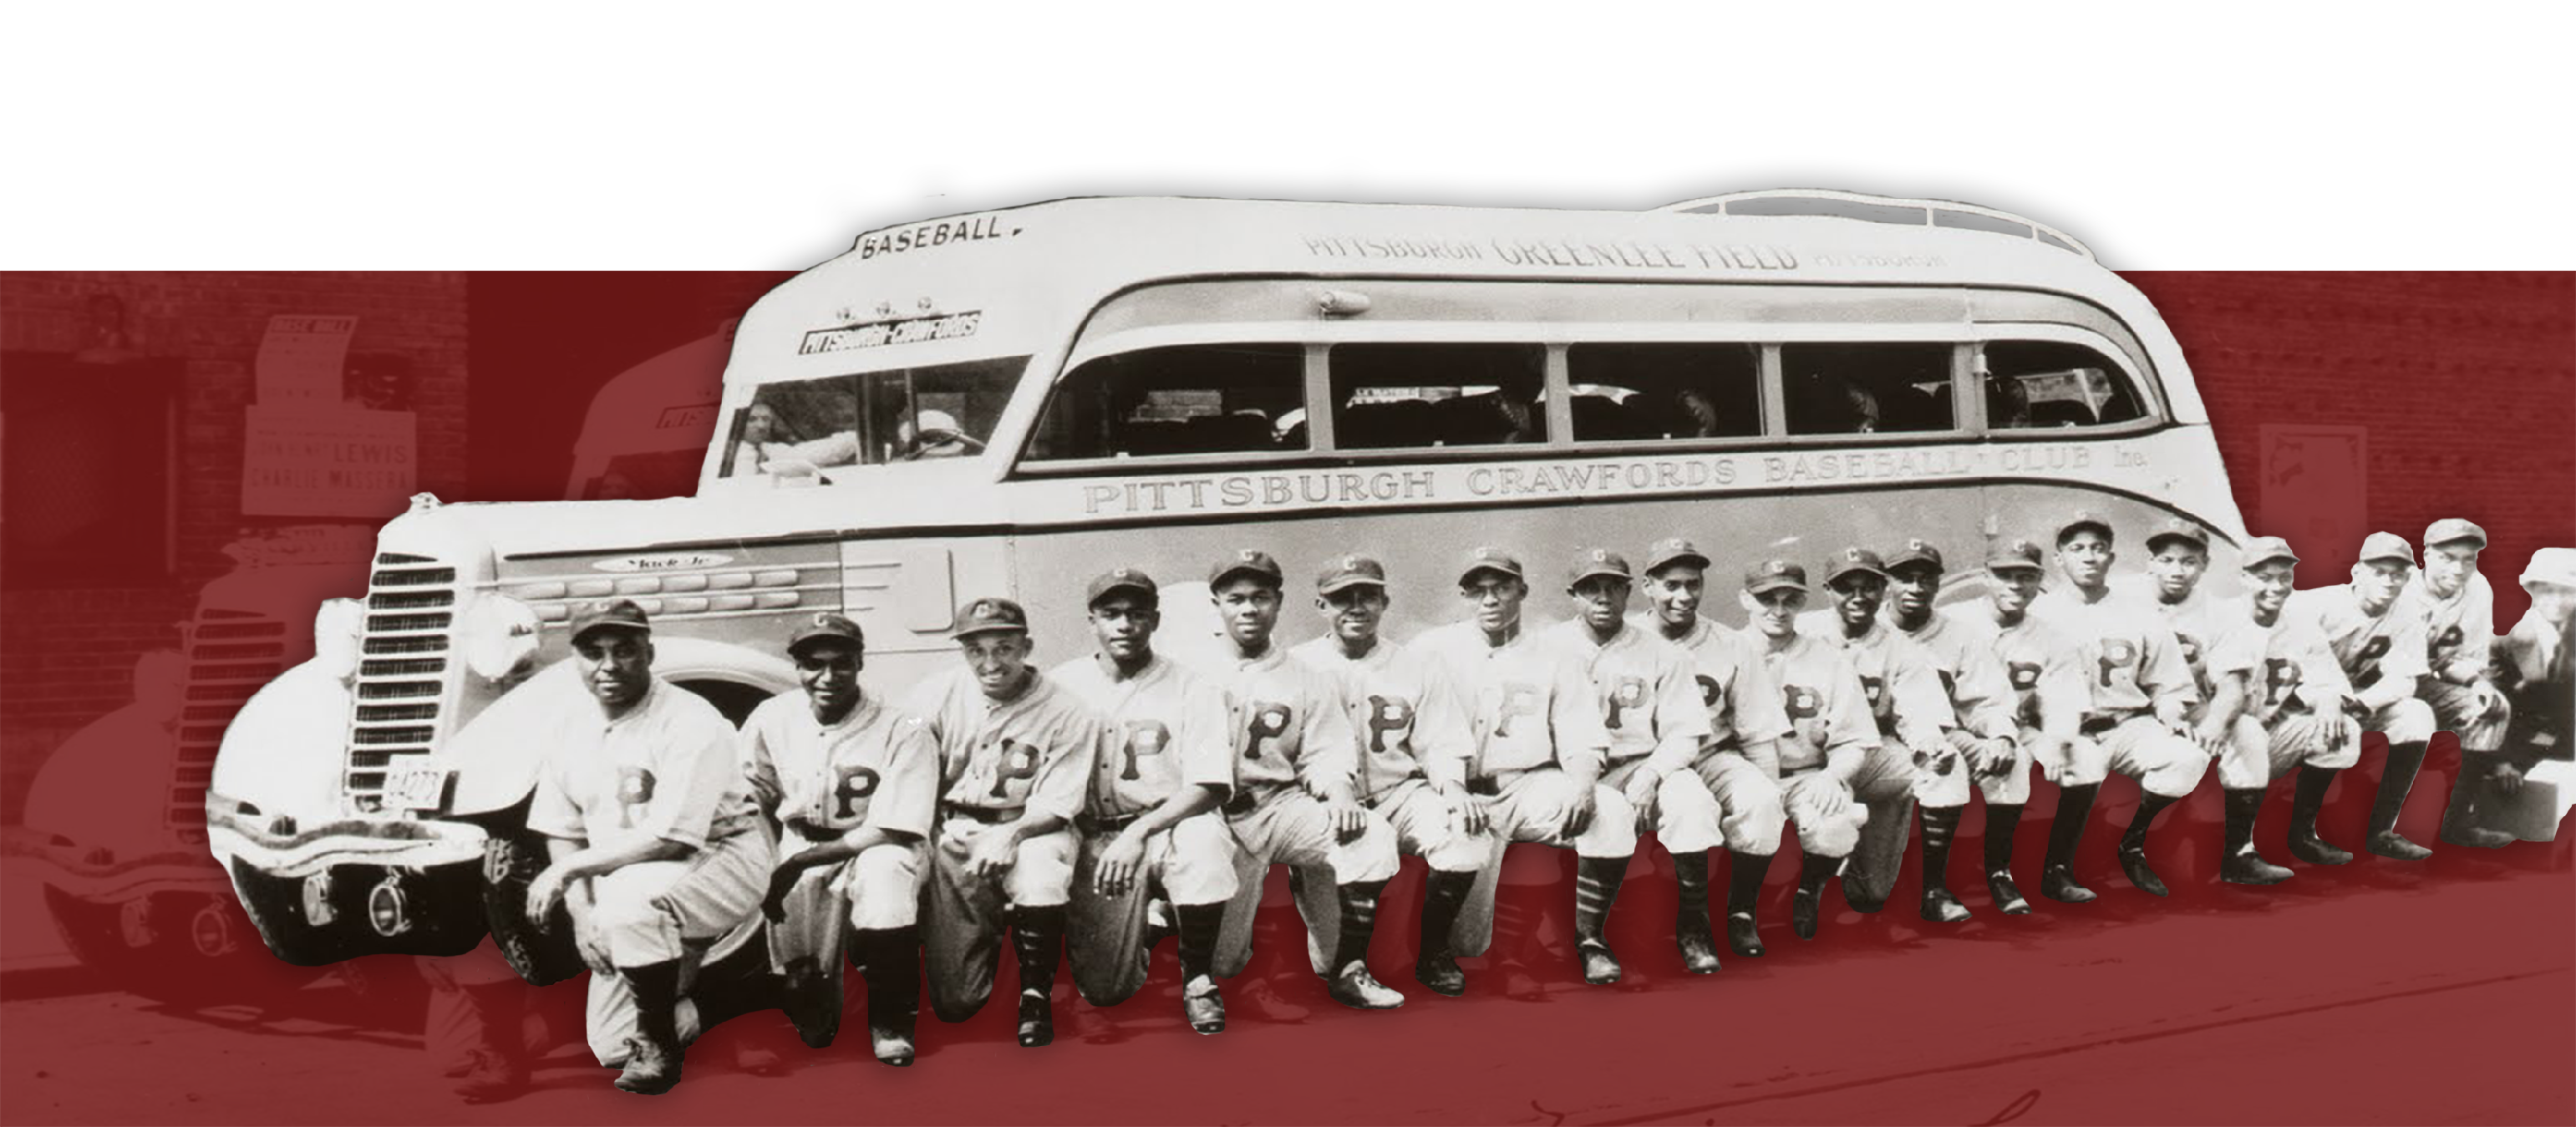 teambrown gives back for every nlbm baseball shirt purchase supporting baseball history and vintage womens aagpbl teams